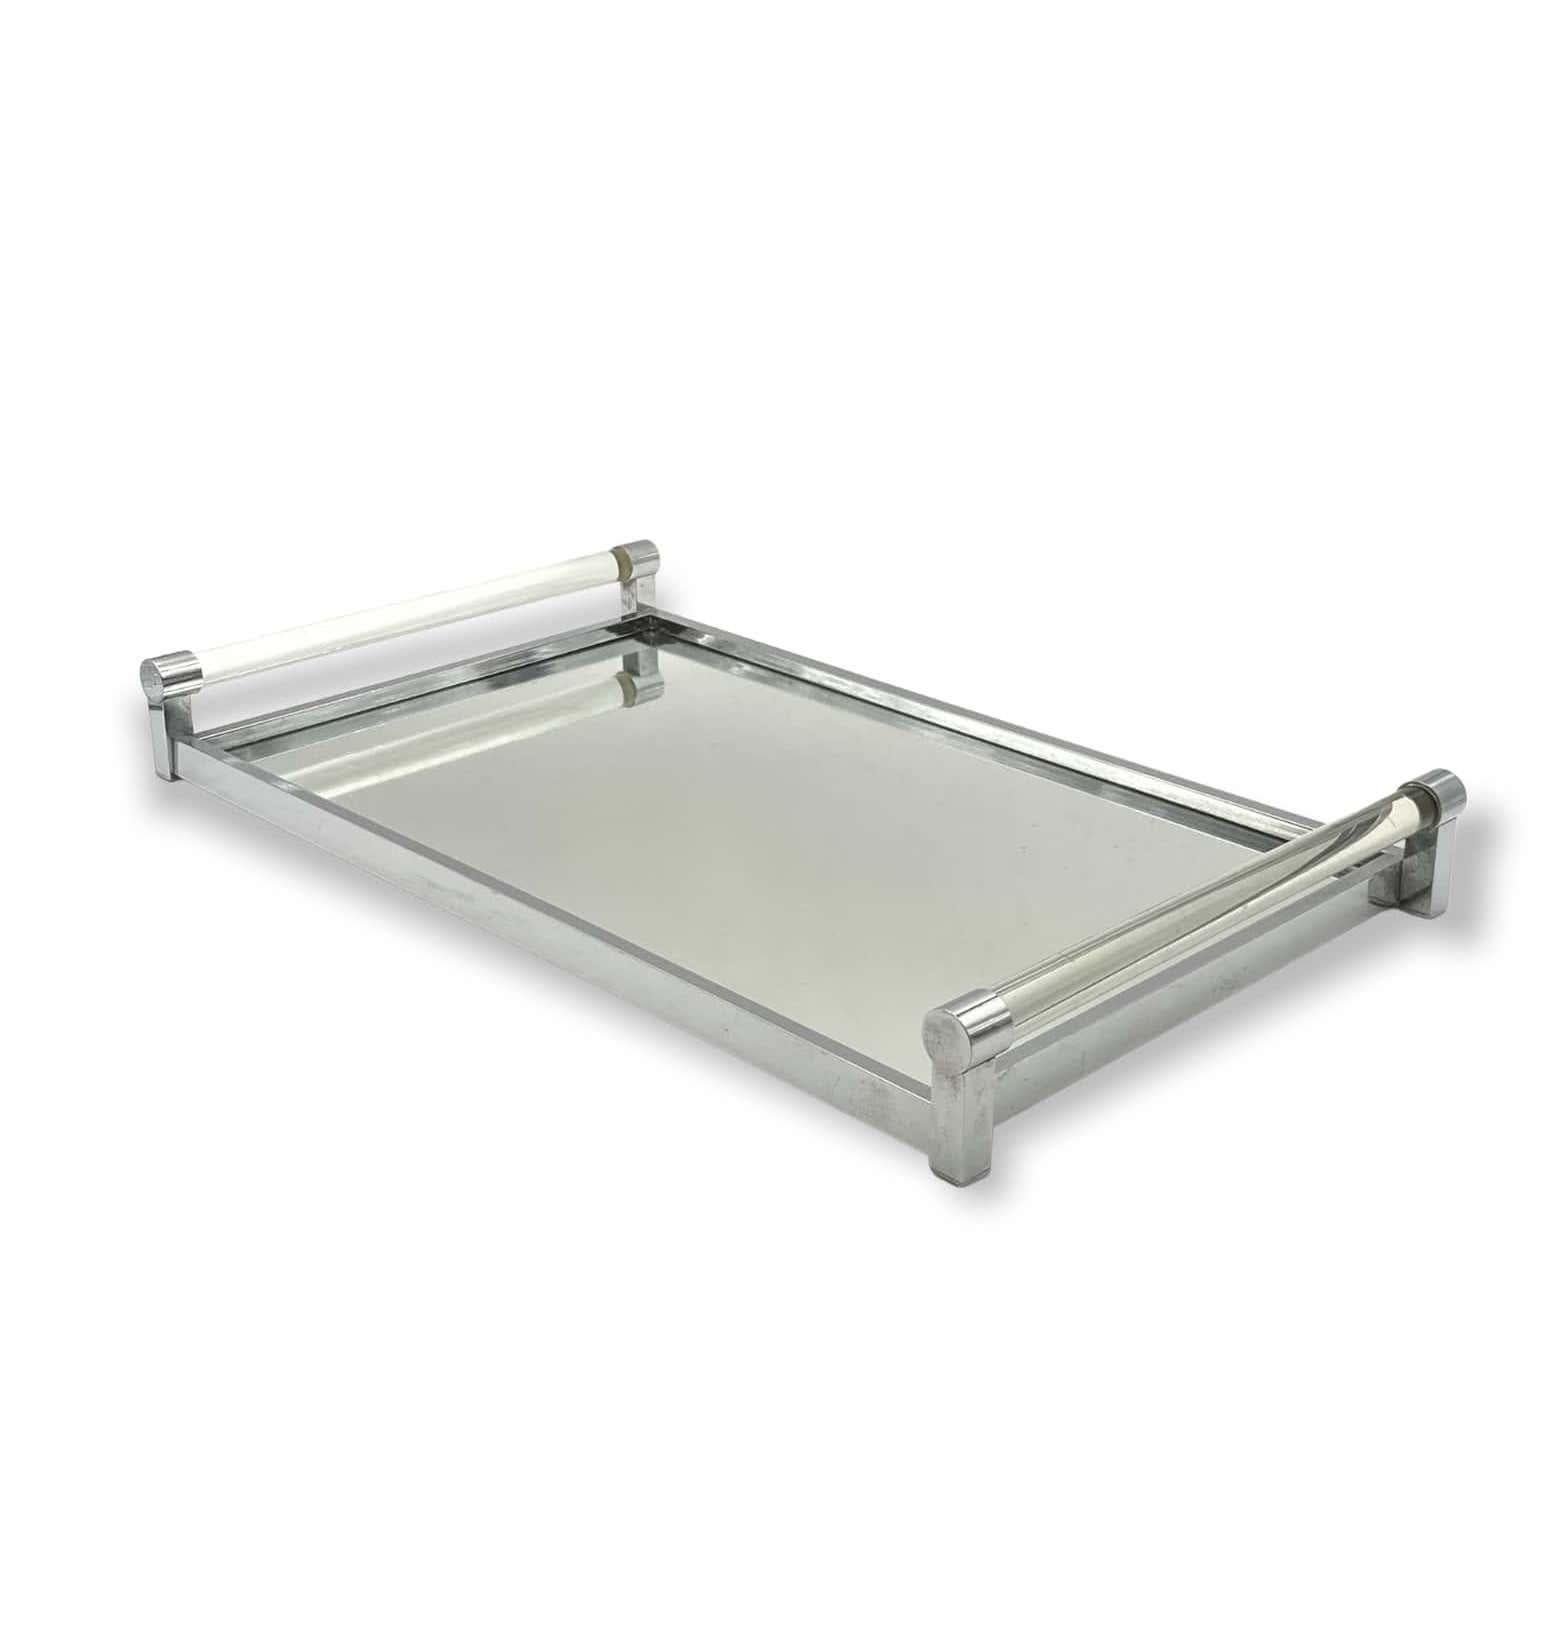 Modernist mirrored tray with lucite details

Jacques Adnet, Paris, France 1940s 

metal, glass, lucite

H 6 cm

36 x 51 cm

Conditions: very good consistent with age and use, signs of wear on the mirror.